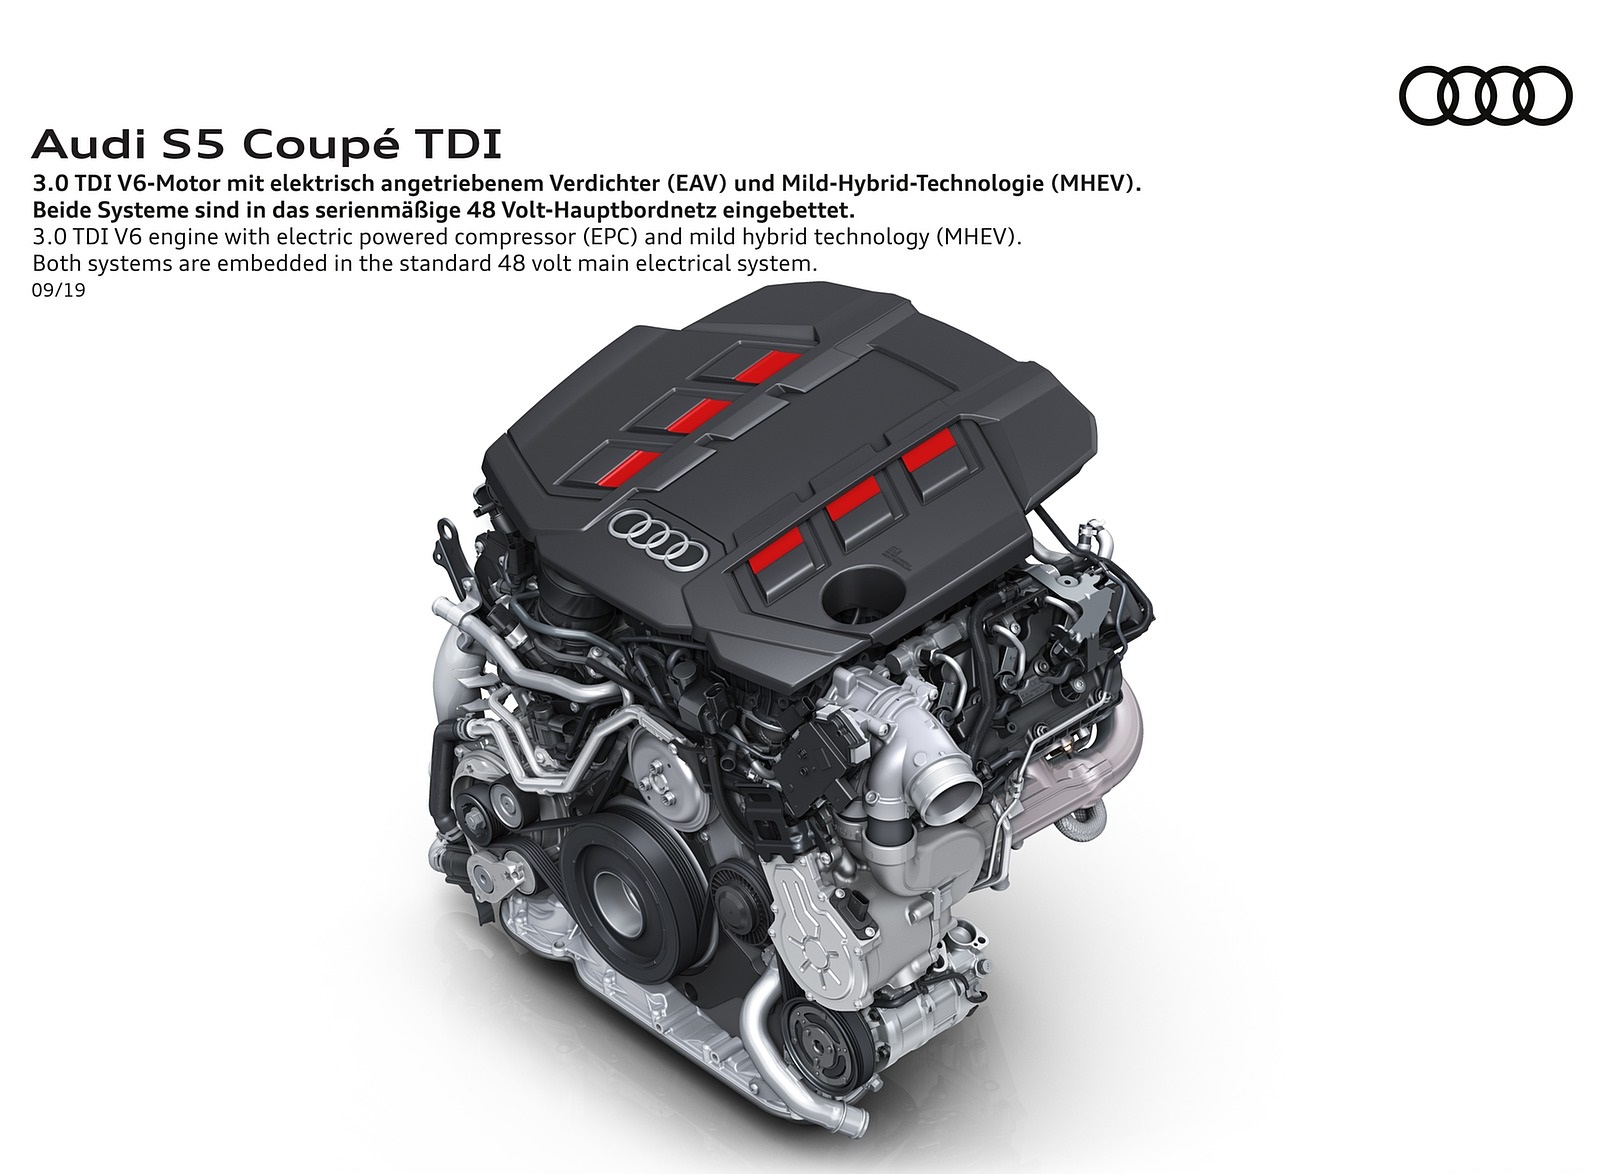 2020 Audi S5 Coupe TDI 3.0 TDI V6 engine with electric powered compressor (EPC) and mild hybrid technology (MHEV) Wallpapers #17 of 18